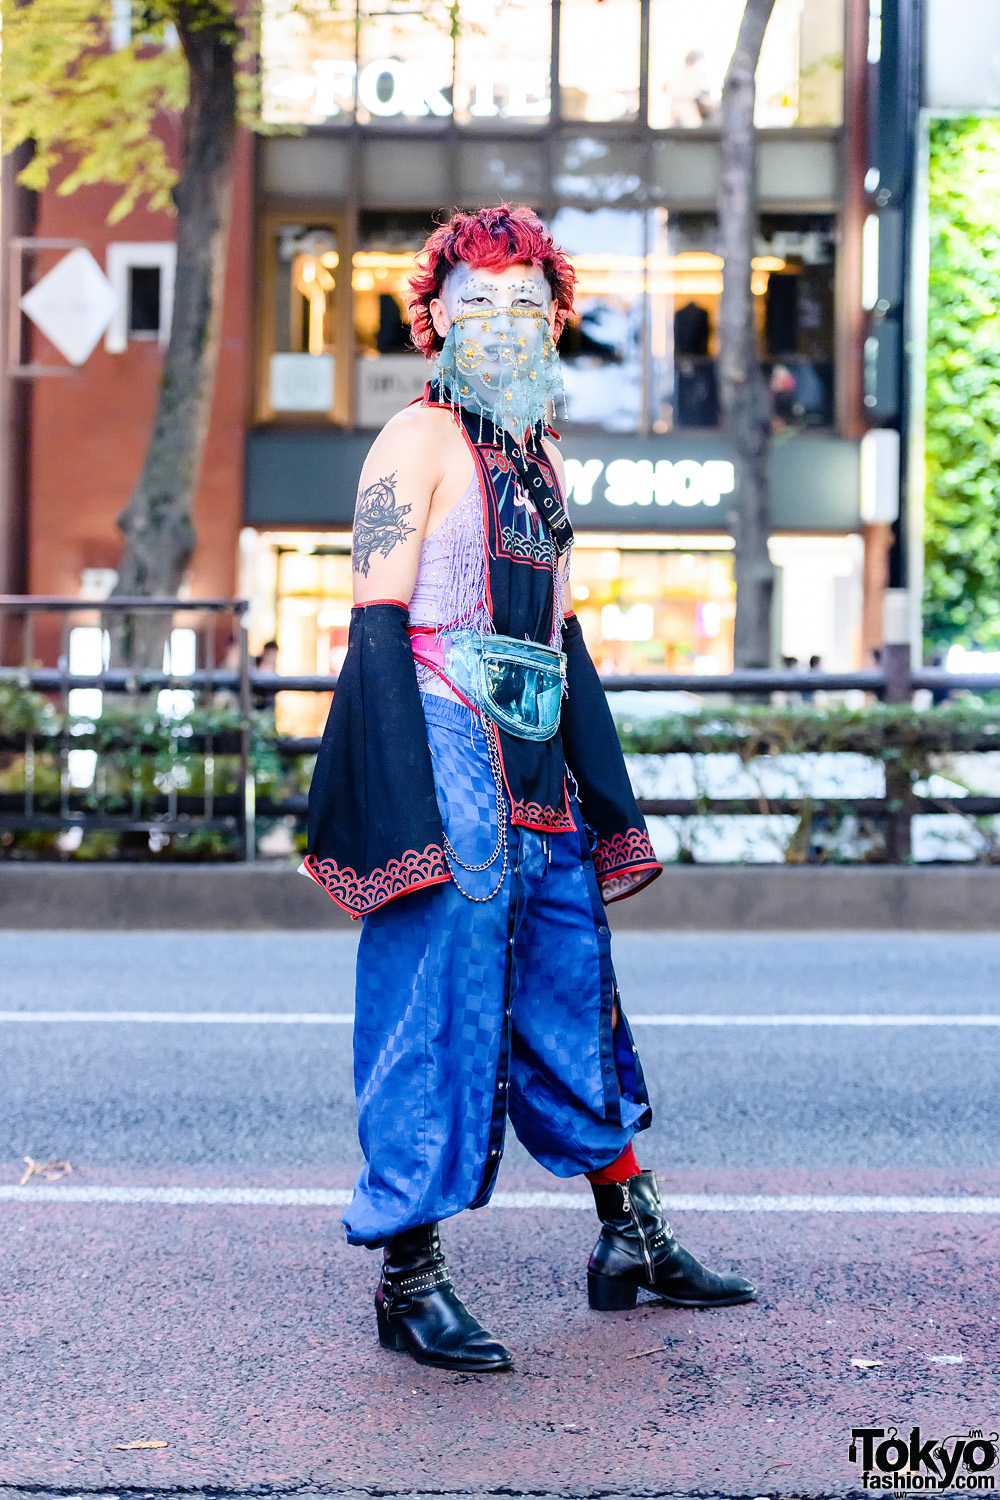 Japanese Streetwear Style w/ Face Art, Flared Arm Guards, Collared Shirt Panel, See-Through Waist Bag & Leather Boots